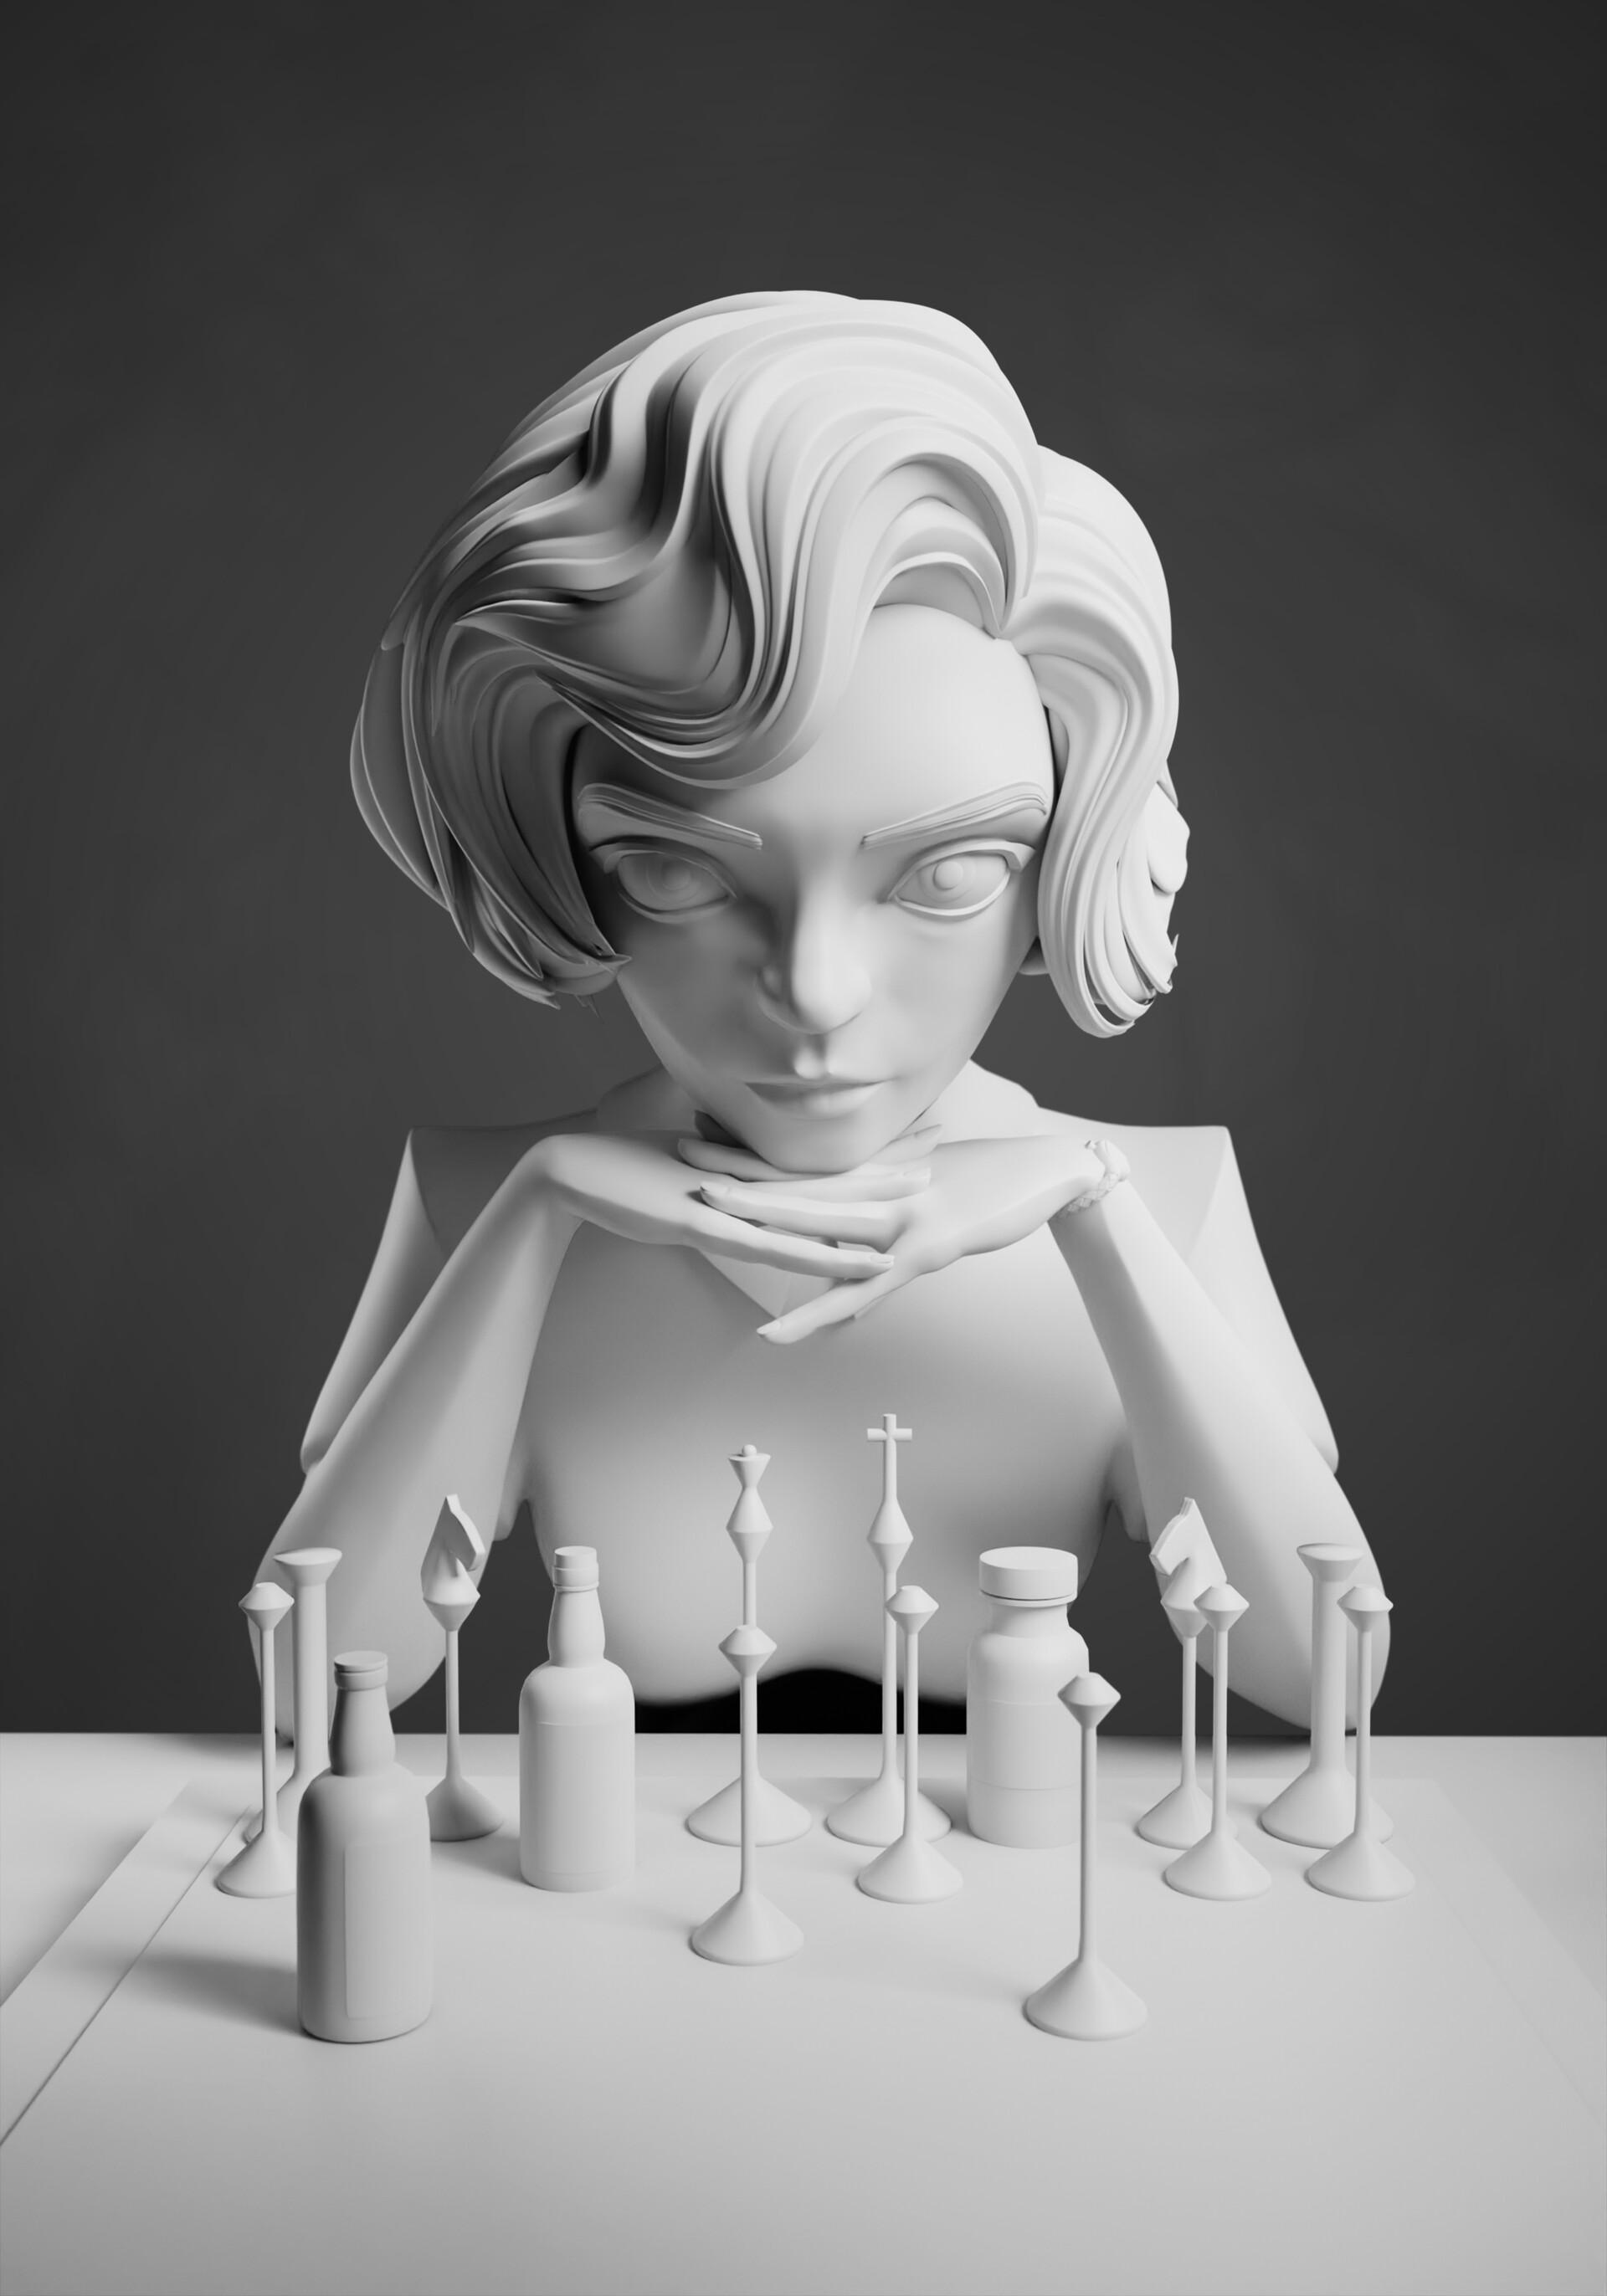 Maxon ZBrush on X: The Queen's Gambit - “My fanart of Elizabeth Harmon  from The Queen's Gambit I did during the weekend. I don't often make fanart  of TV shows, but this